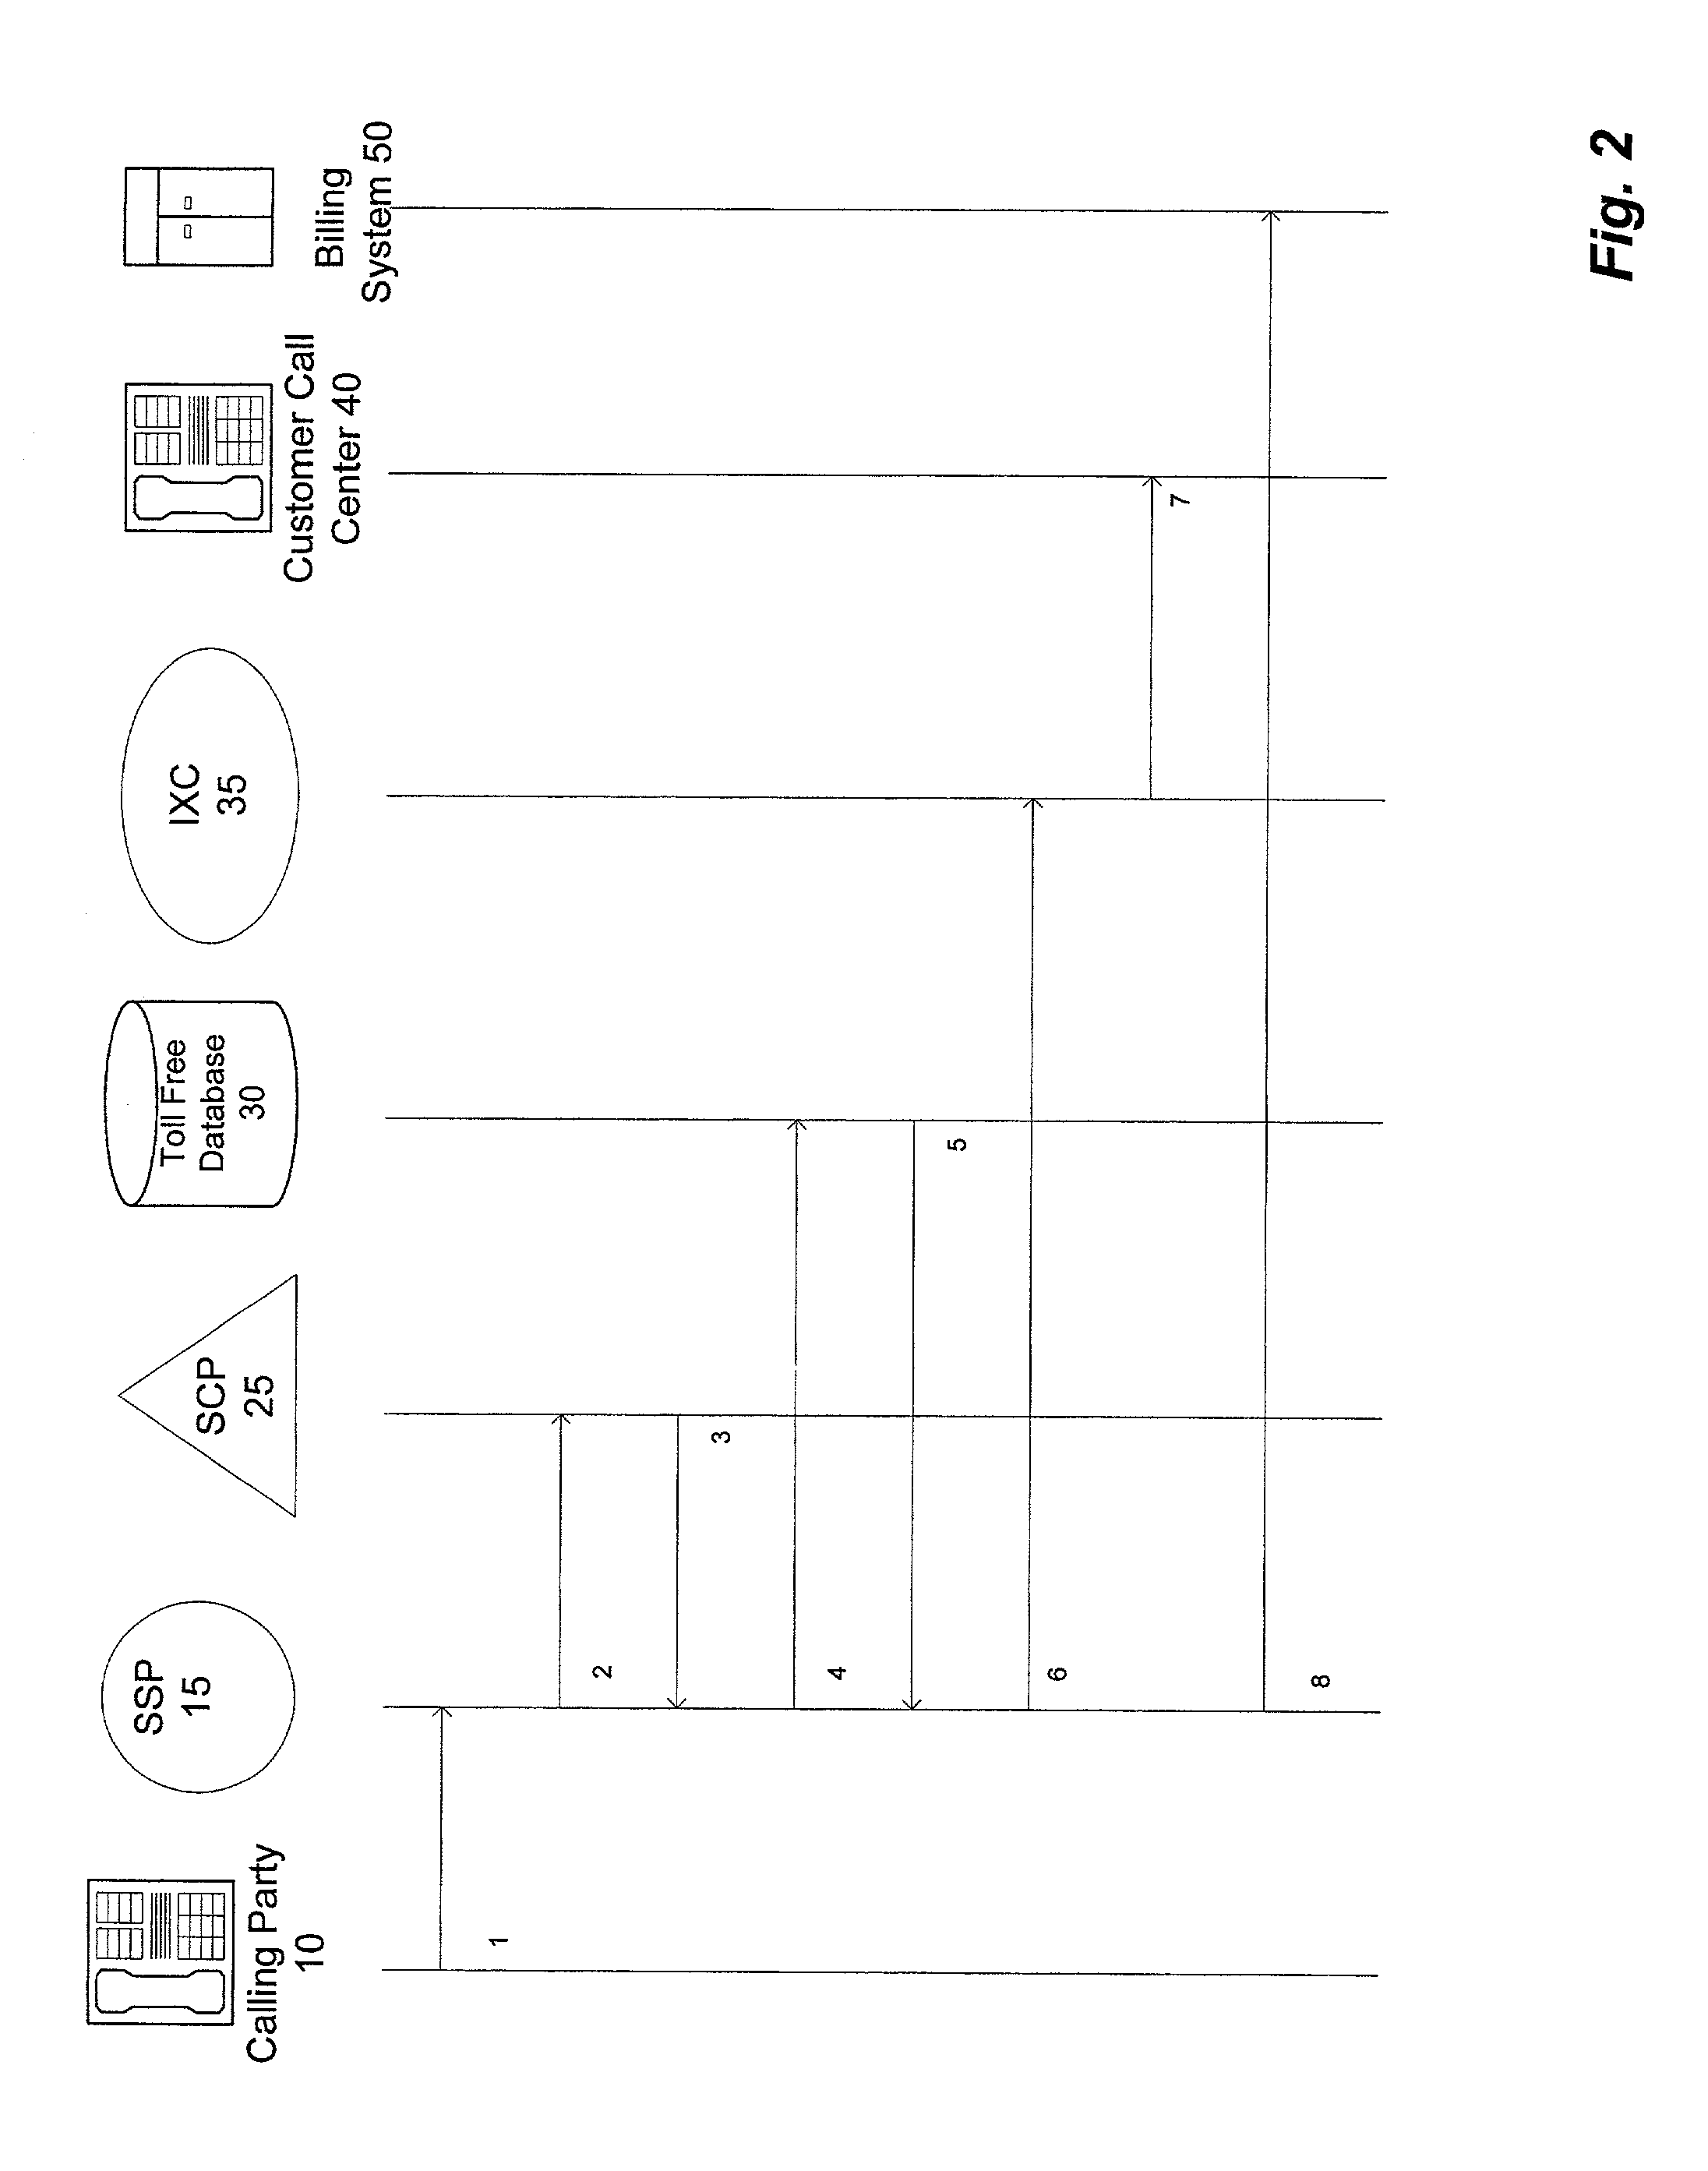 Method of billing in an abbreviated dialing service